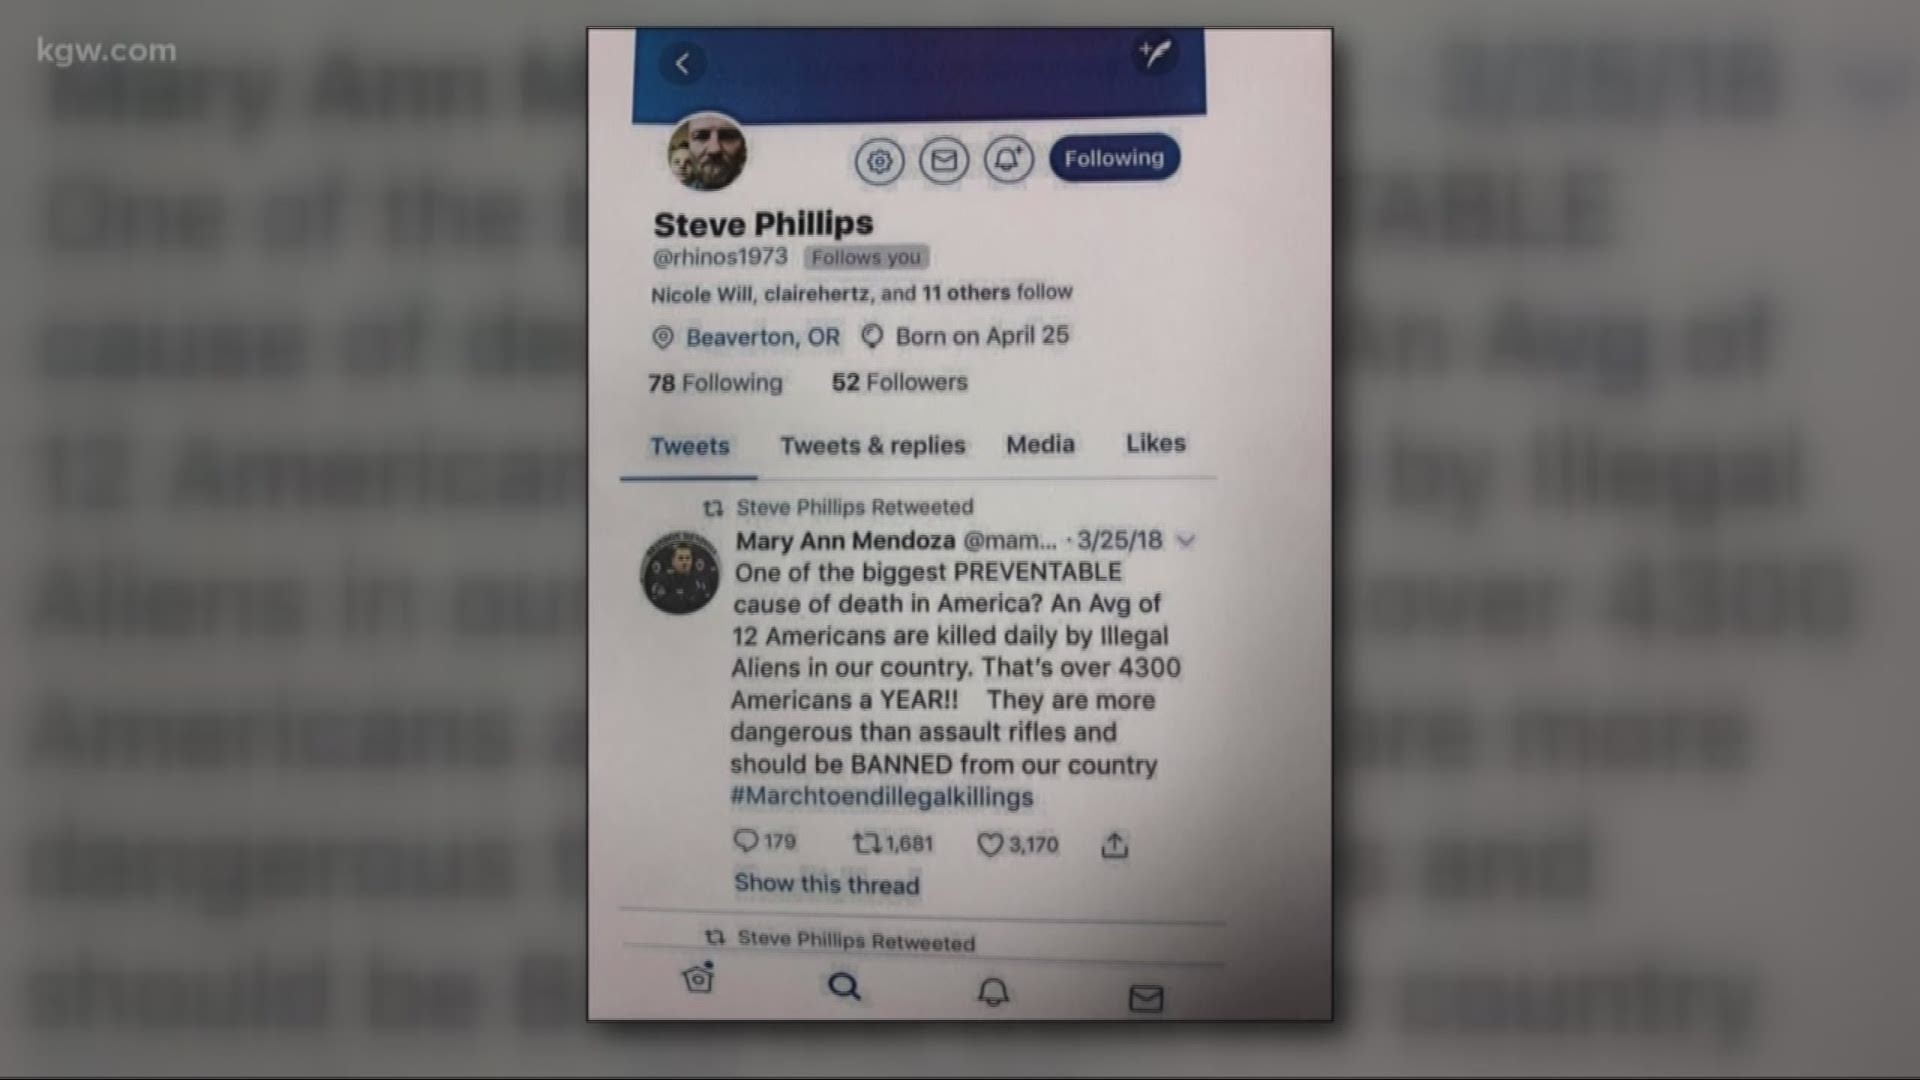 The Beaverton School District said "the views expressed in a recent social media post and retweet by the Deputy Superintendent Steve Phillips are not in keeping with the standards and values we hold as the Beaverton School District."